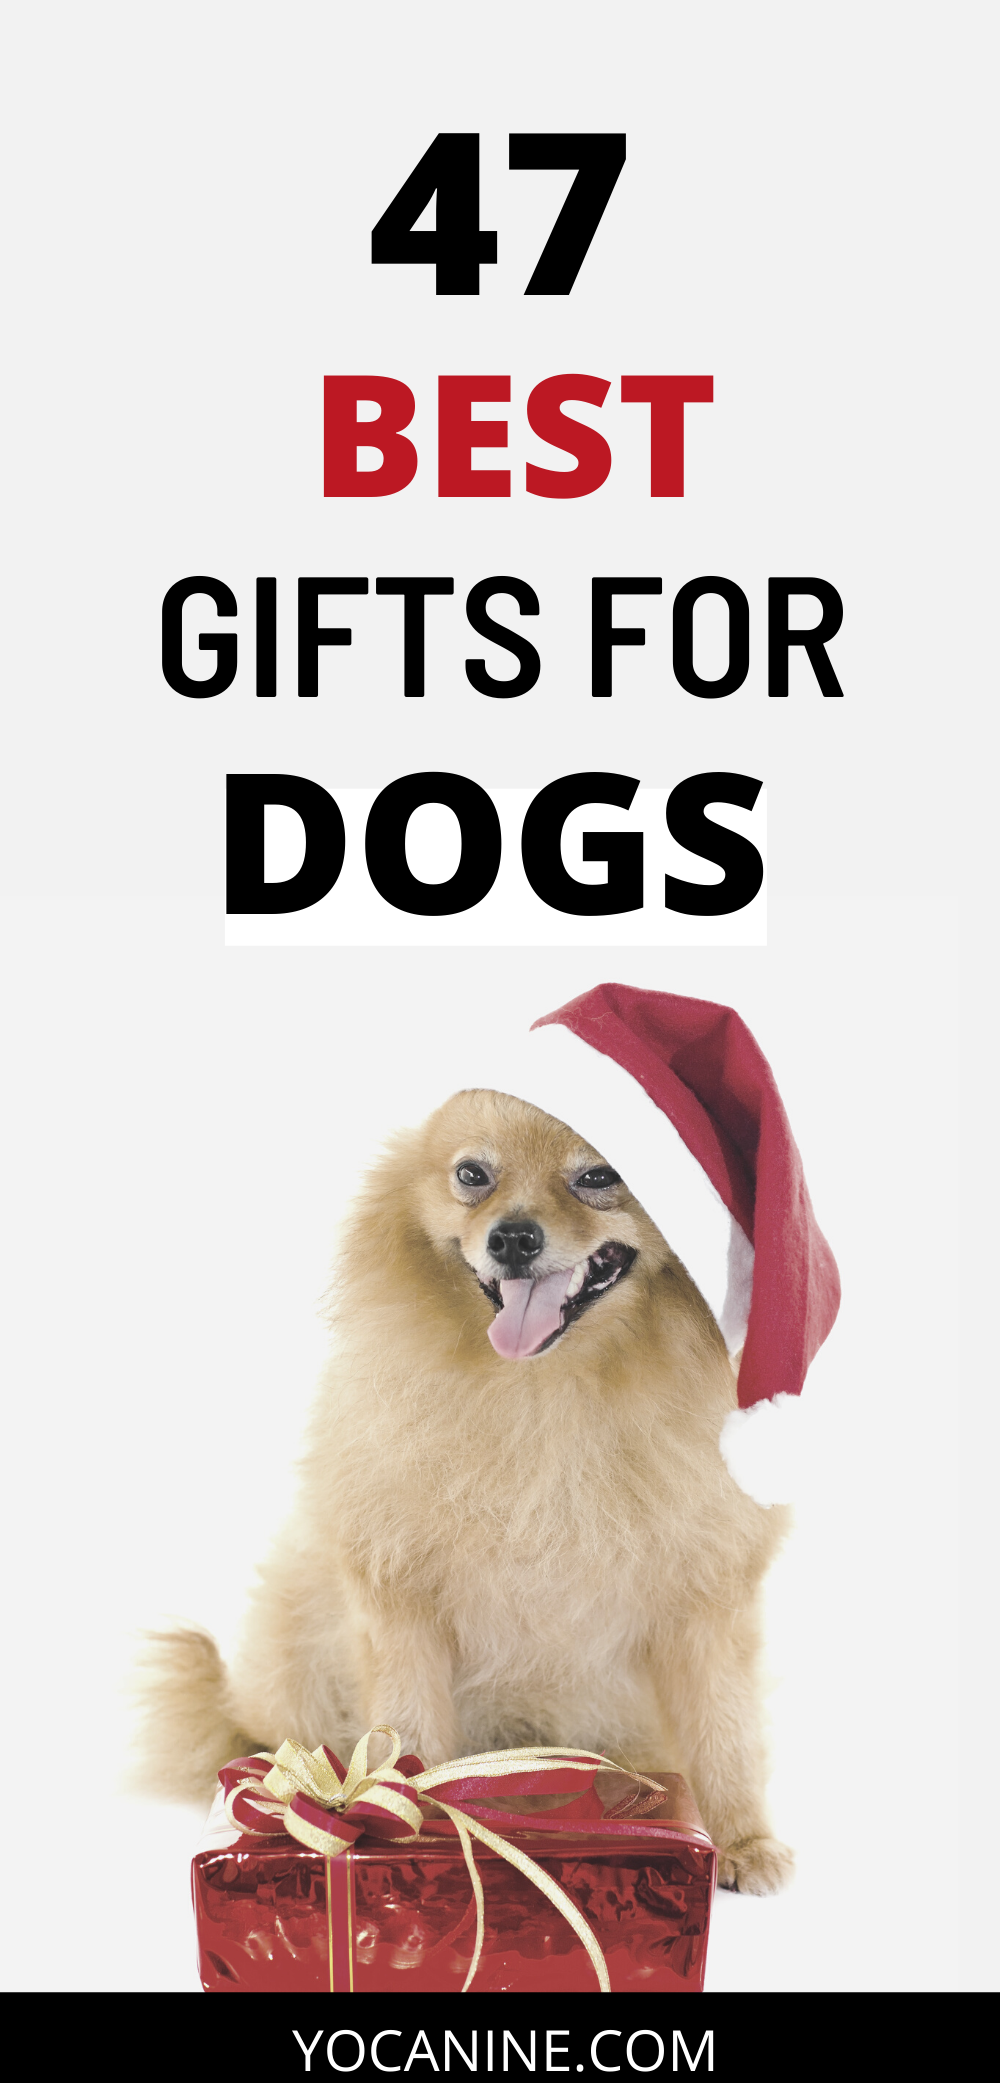 christmas gifts for dog lovers